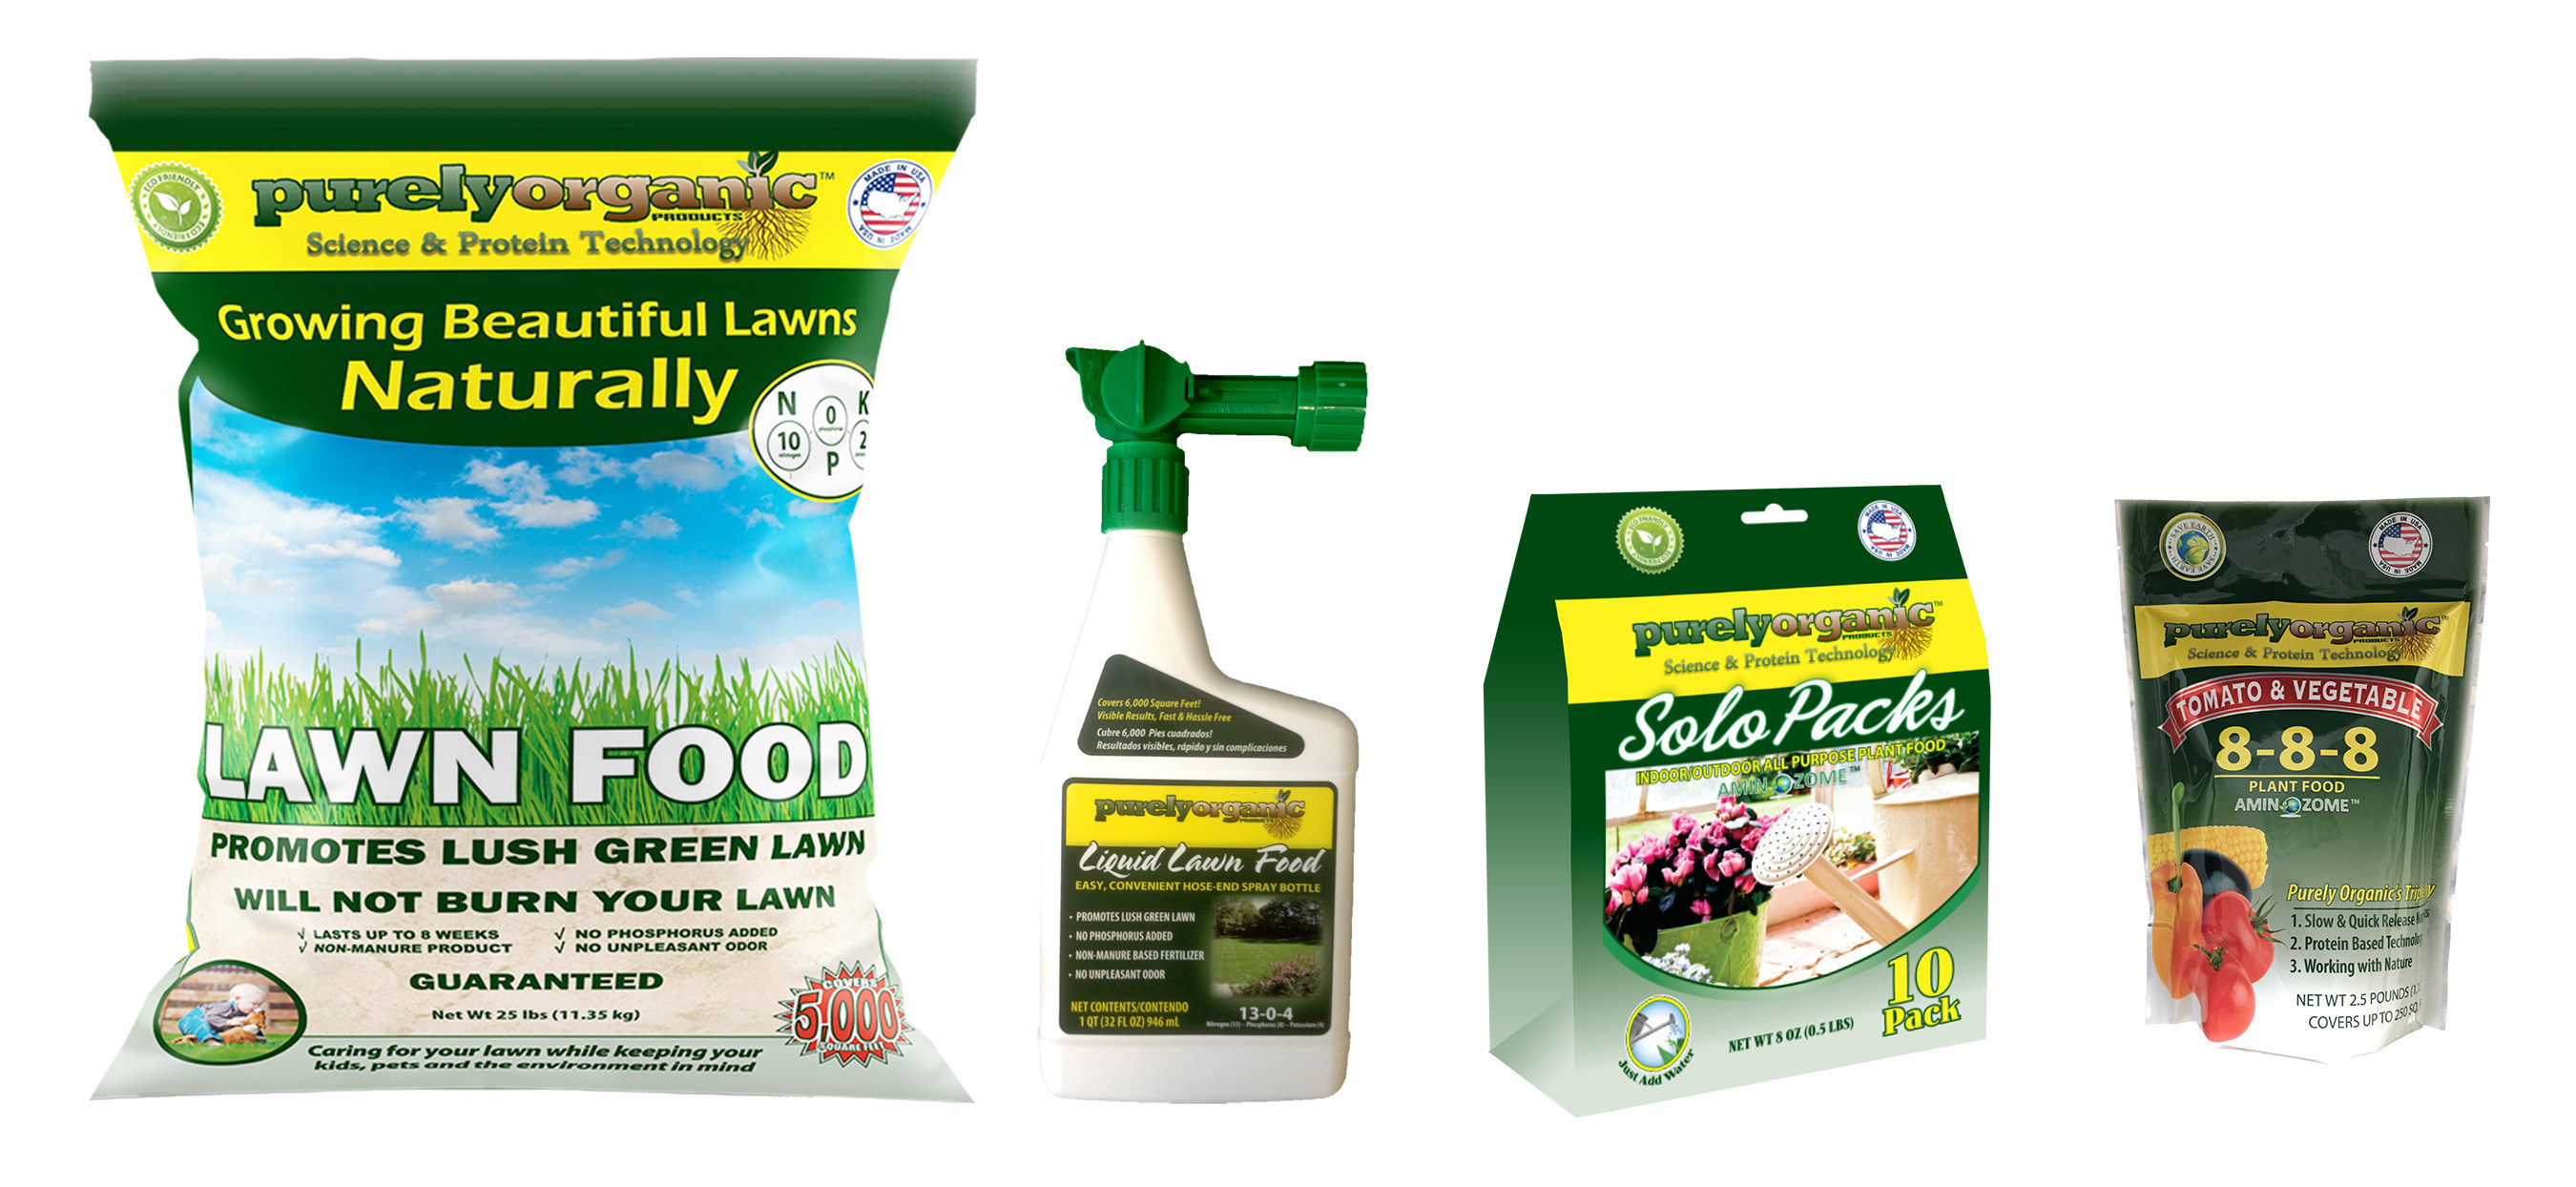 Purely Organic Products Debuts Two New, Natural Lawn and Gardening